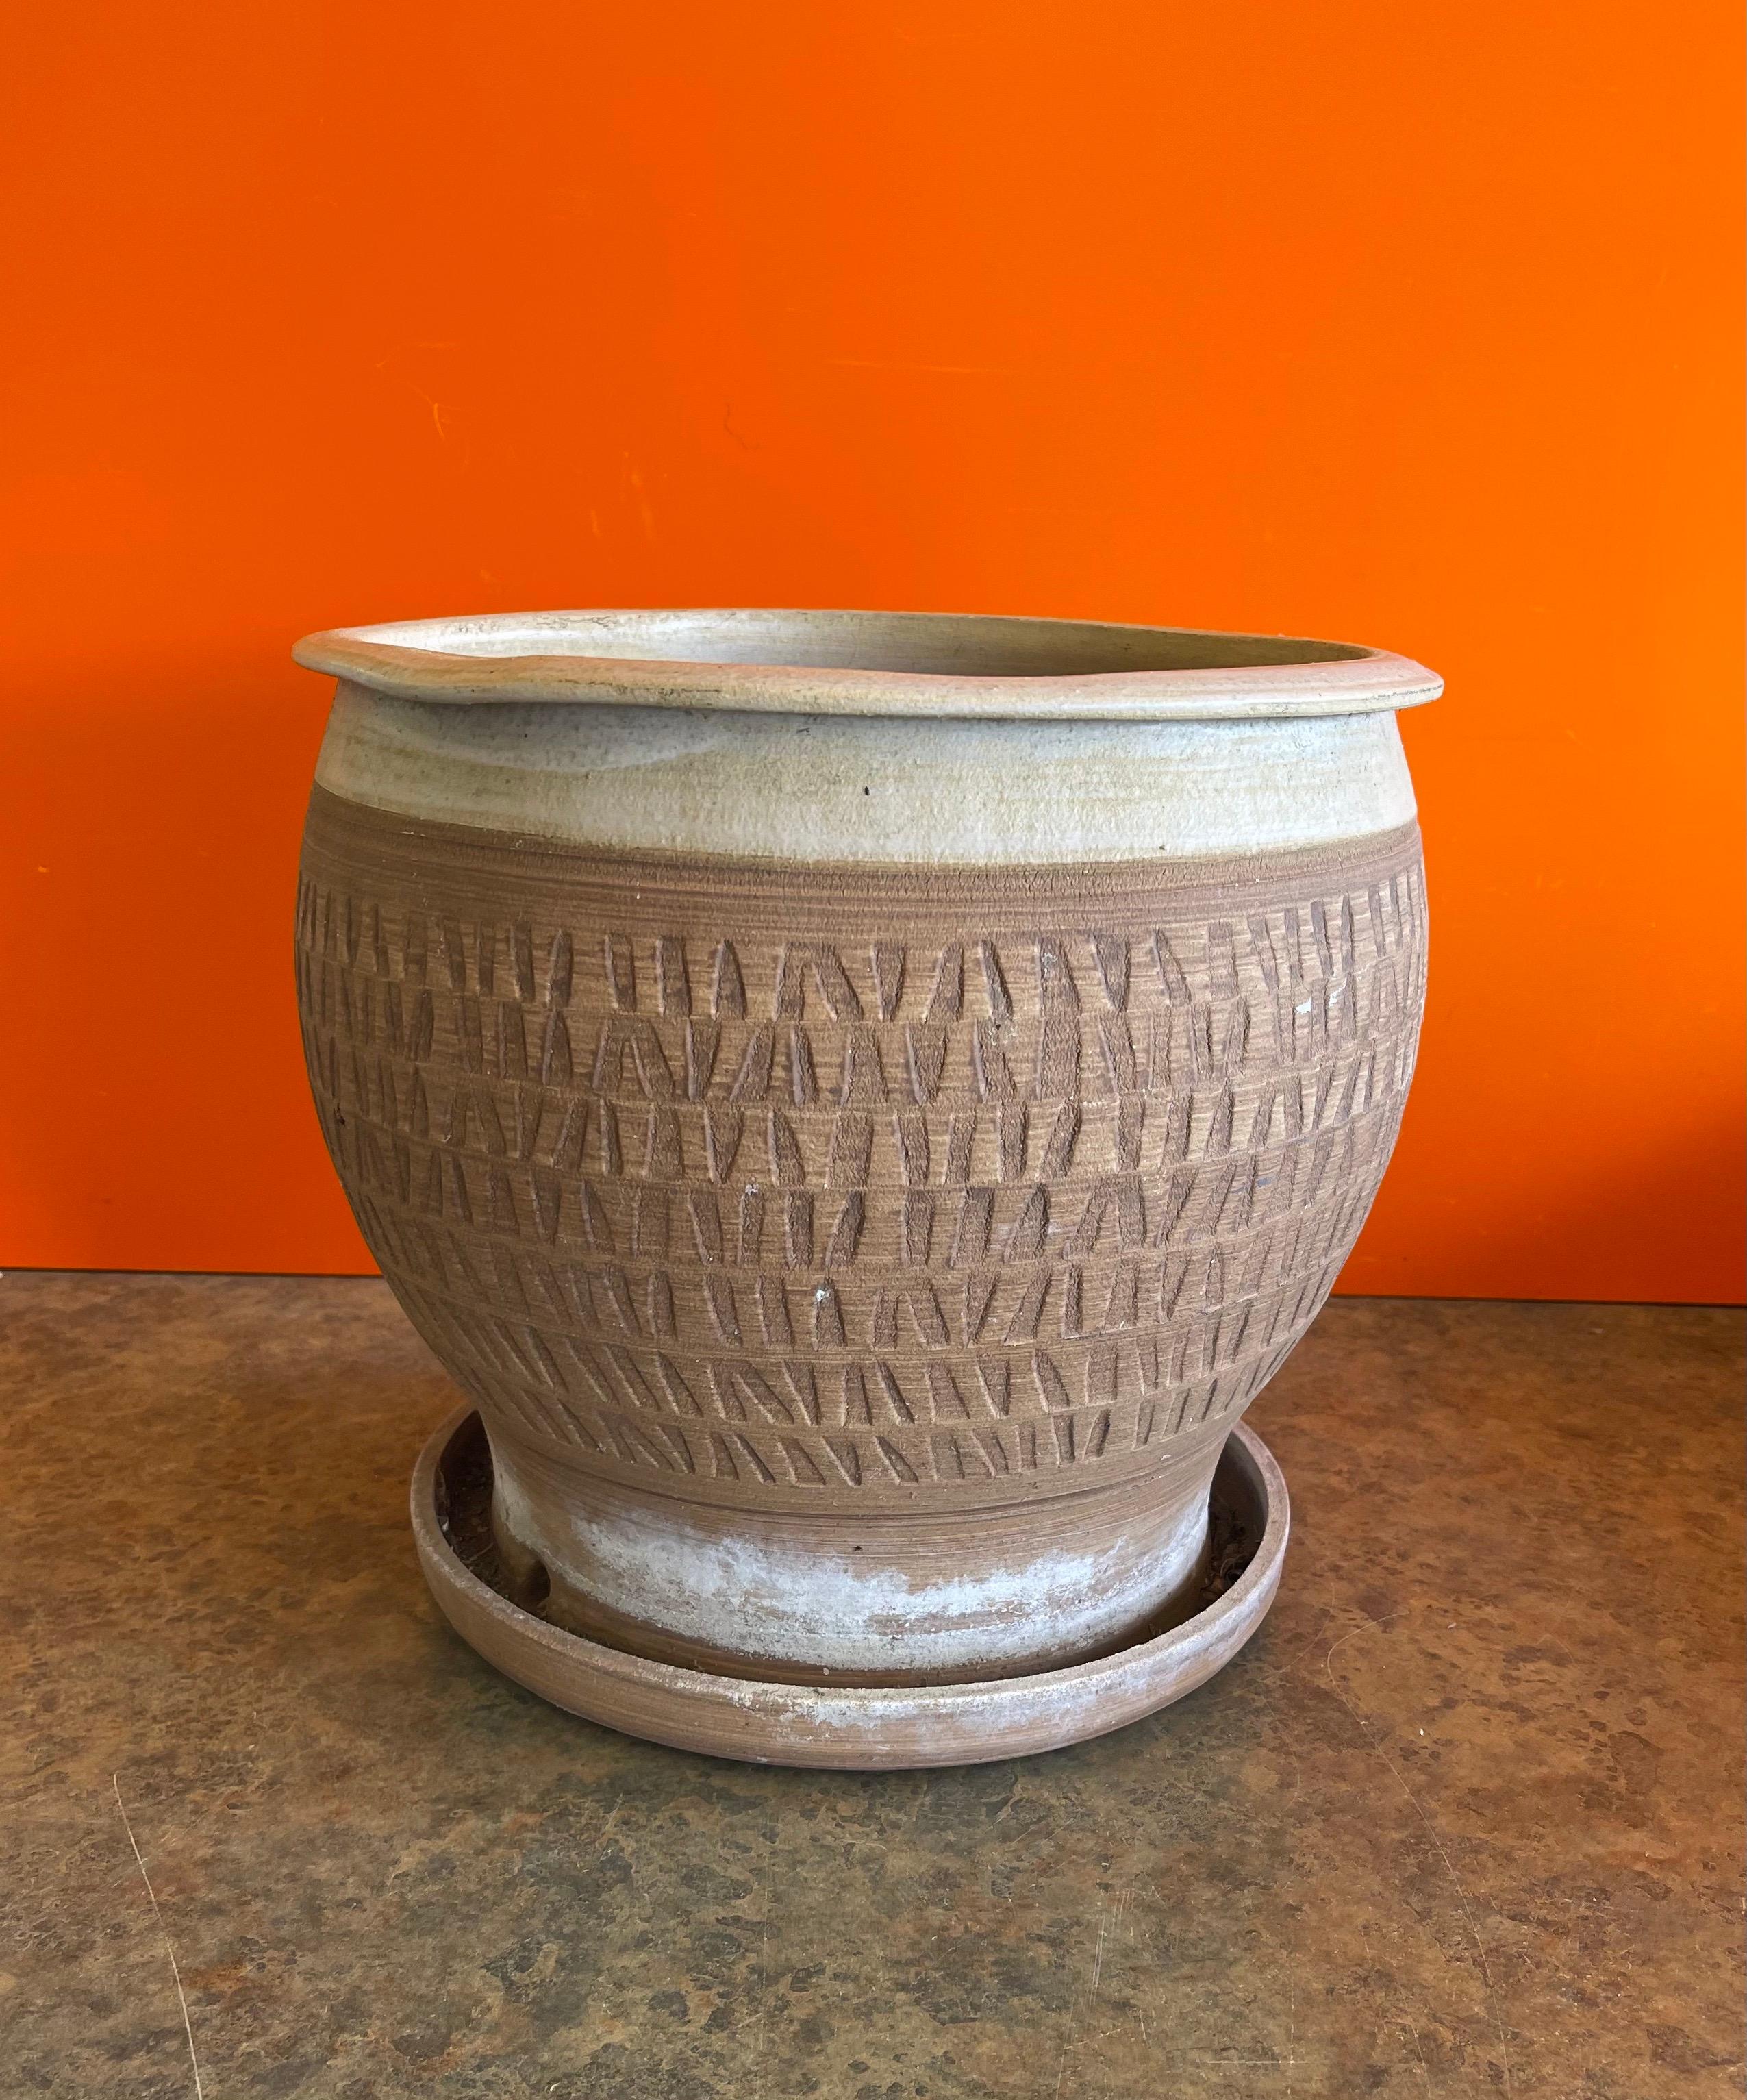 Large earthenware pottery planter with attached tray in the style of David Cressey / Robert Maxwell, circa 1980s. The piece is in very good vintage condition with no chips or cracks and measures 12